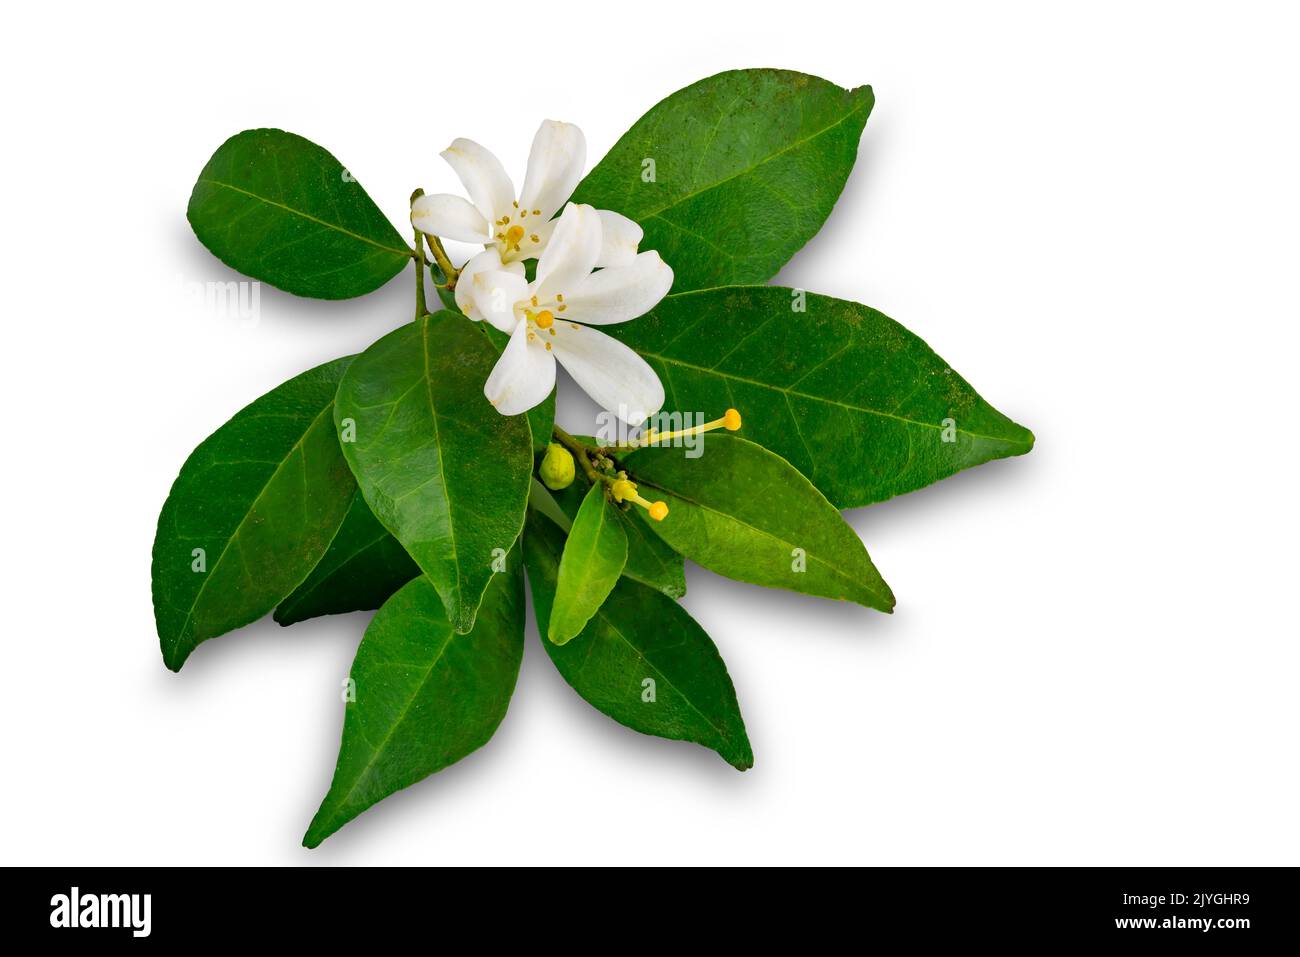 View of orange jasmine with green leaves isolated on white background with clipping path. Stock Photo